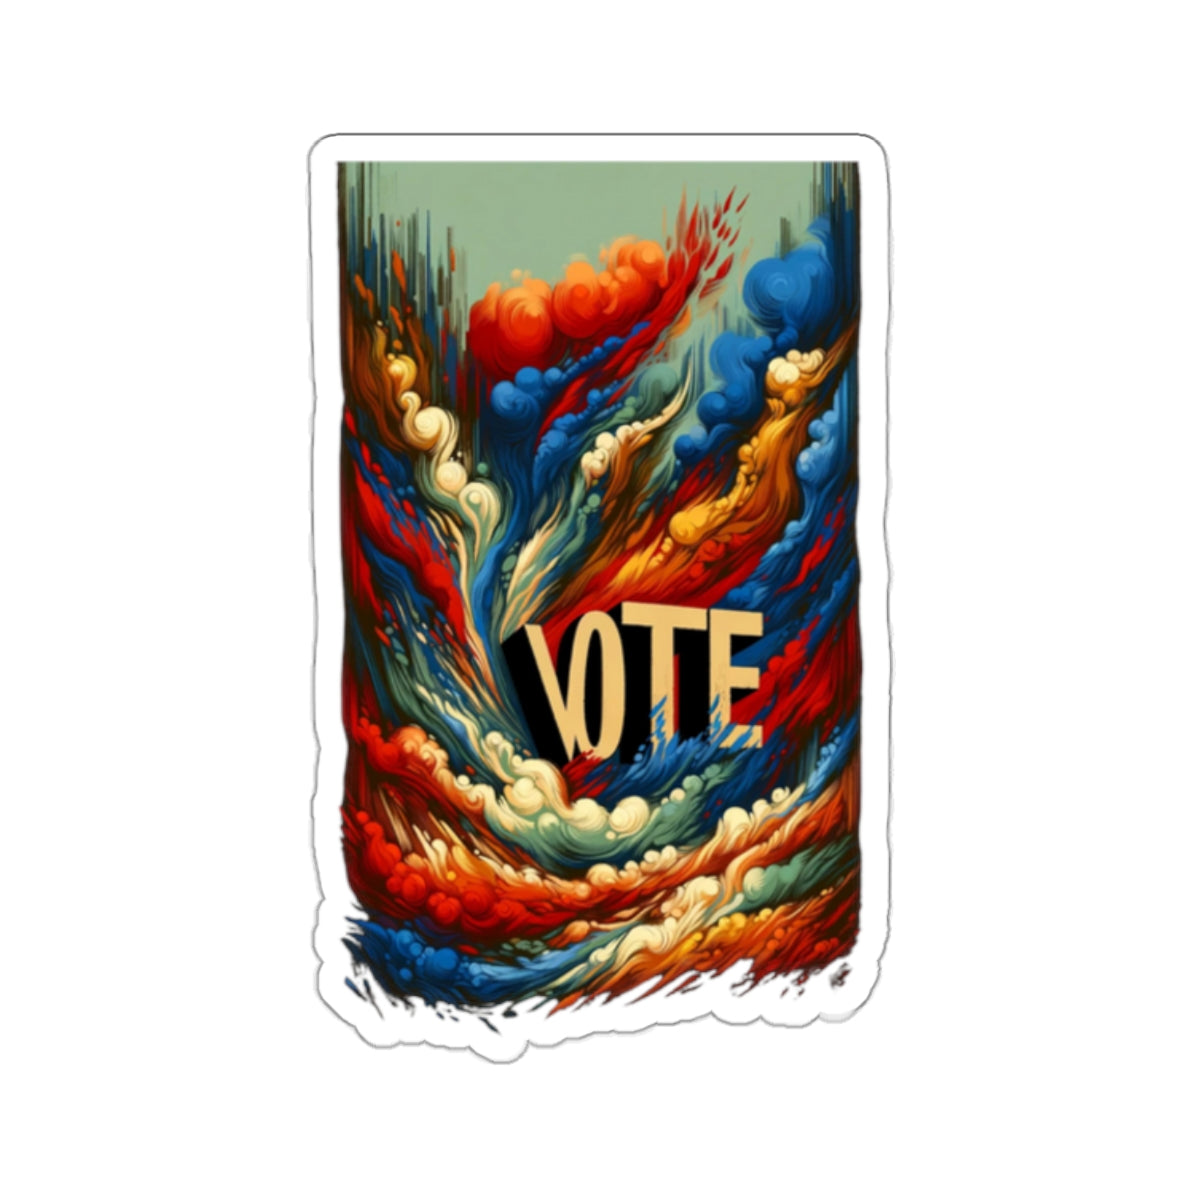 Inspirational Statement Sticker: VOTE! for laptop, kindle, phone, ipad, instrument case, notebook, mood board, wall